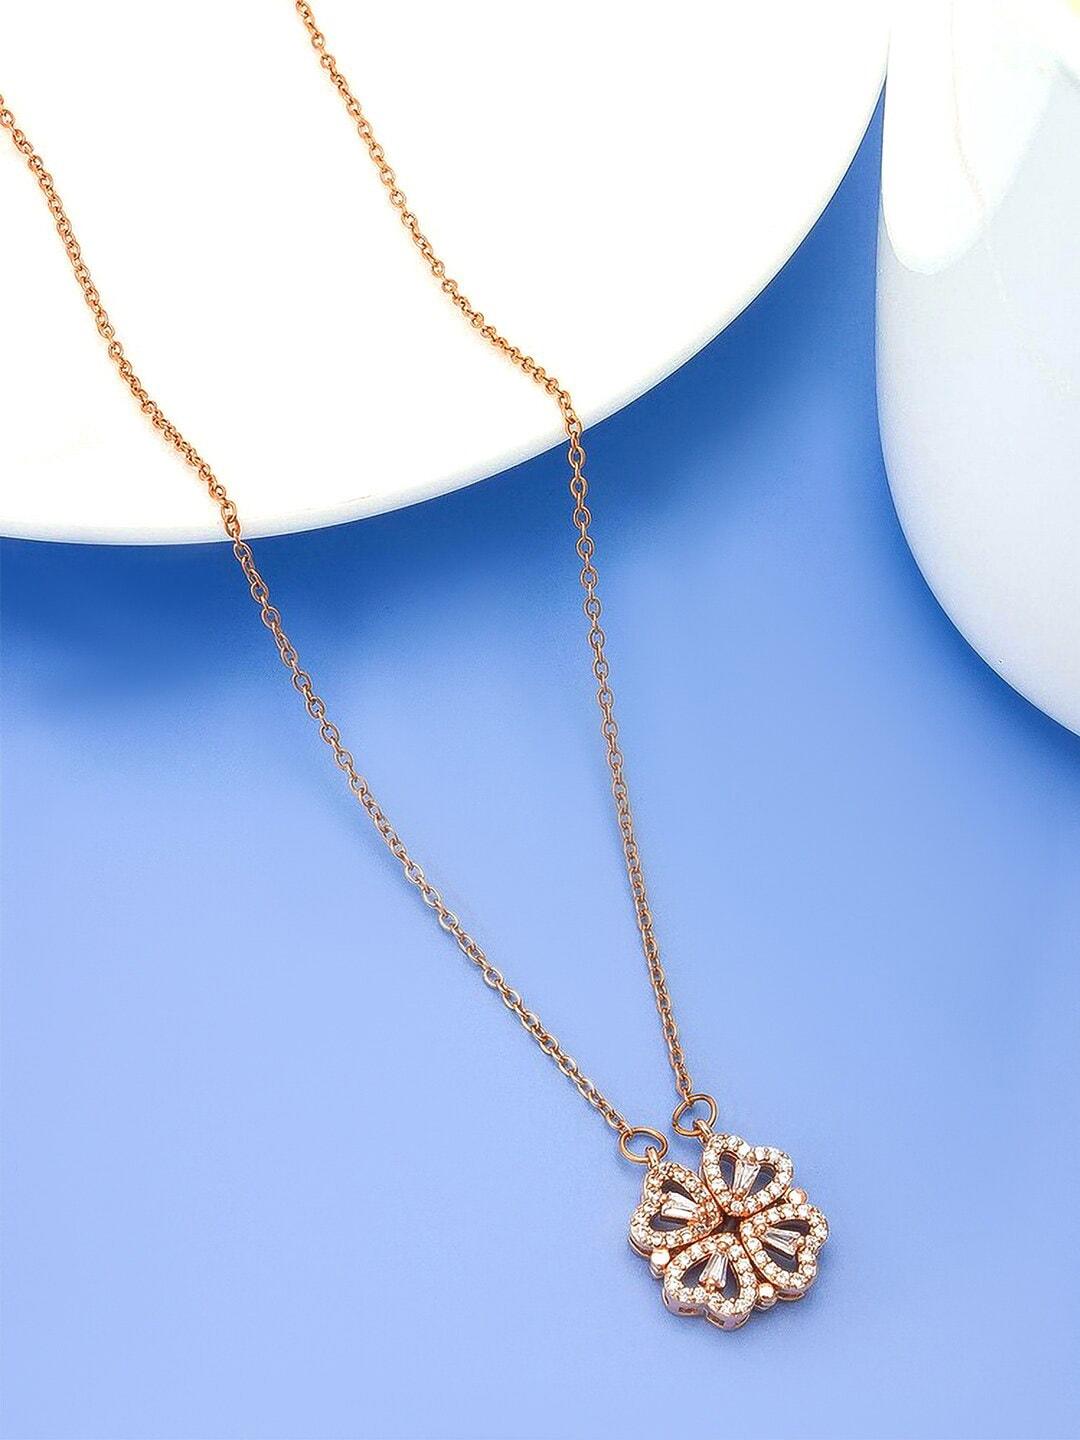 PRIVIU Rose Gold-Plated Necklace